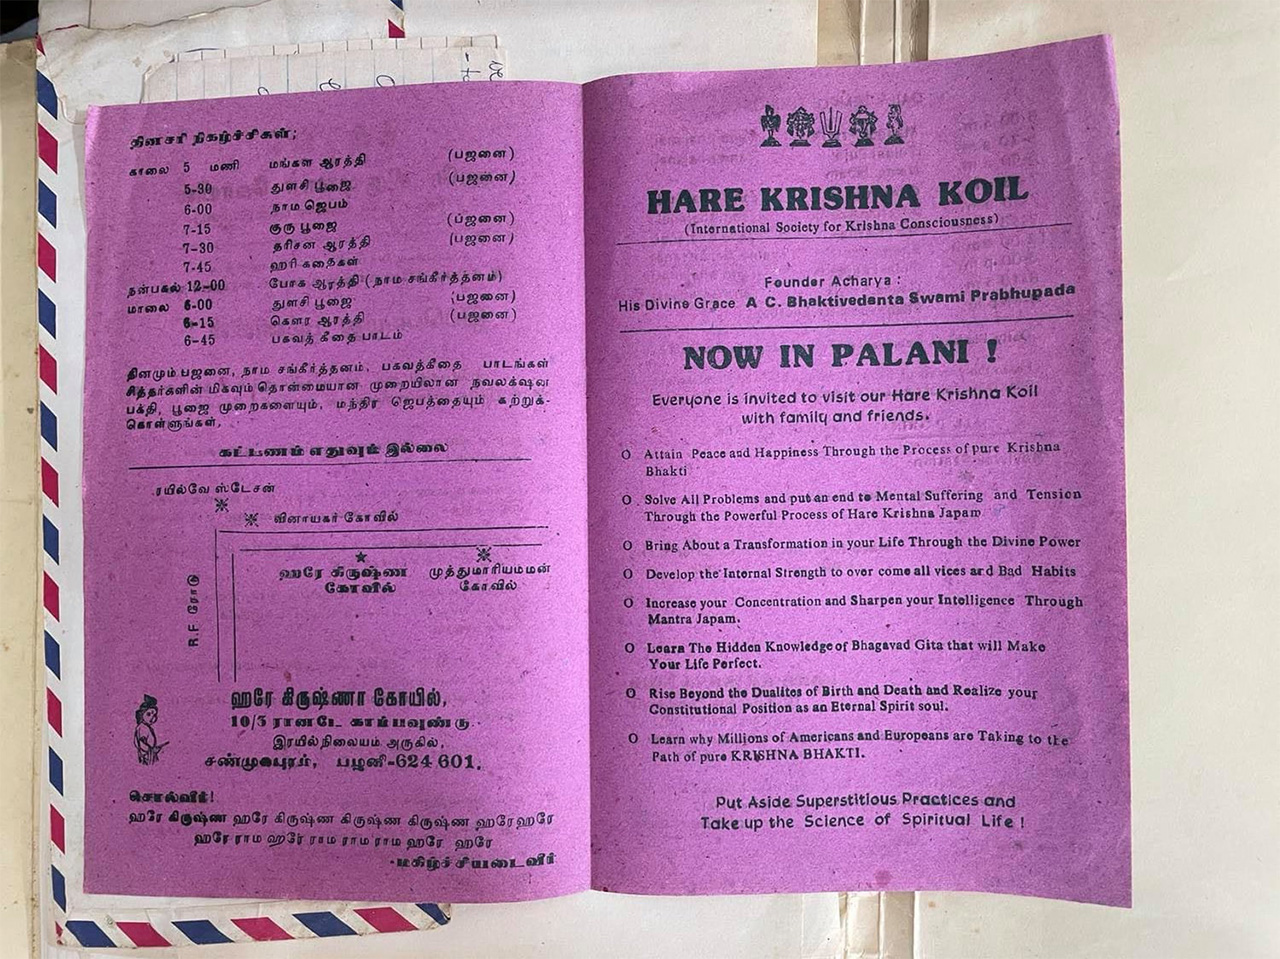 Finding a 23 Year Old Flyer for Our Ashram in Palani